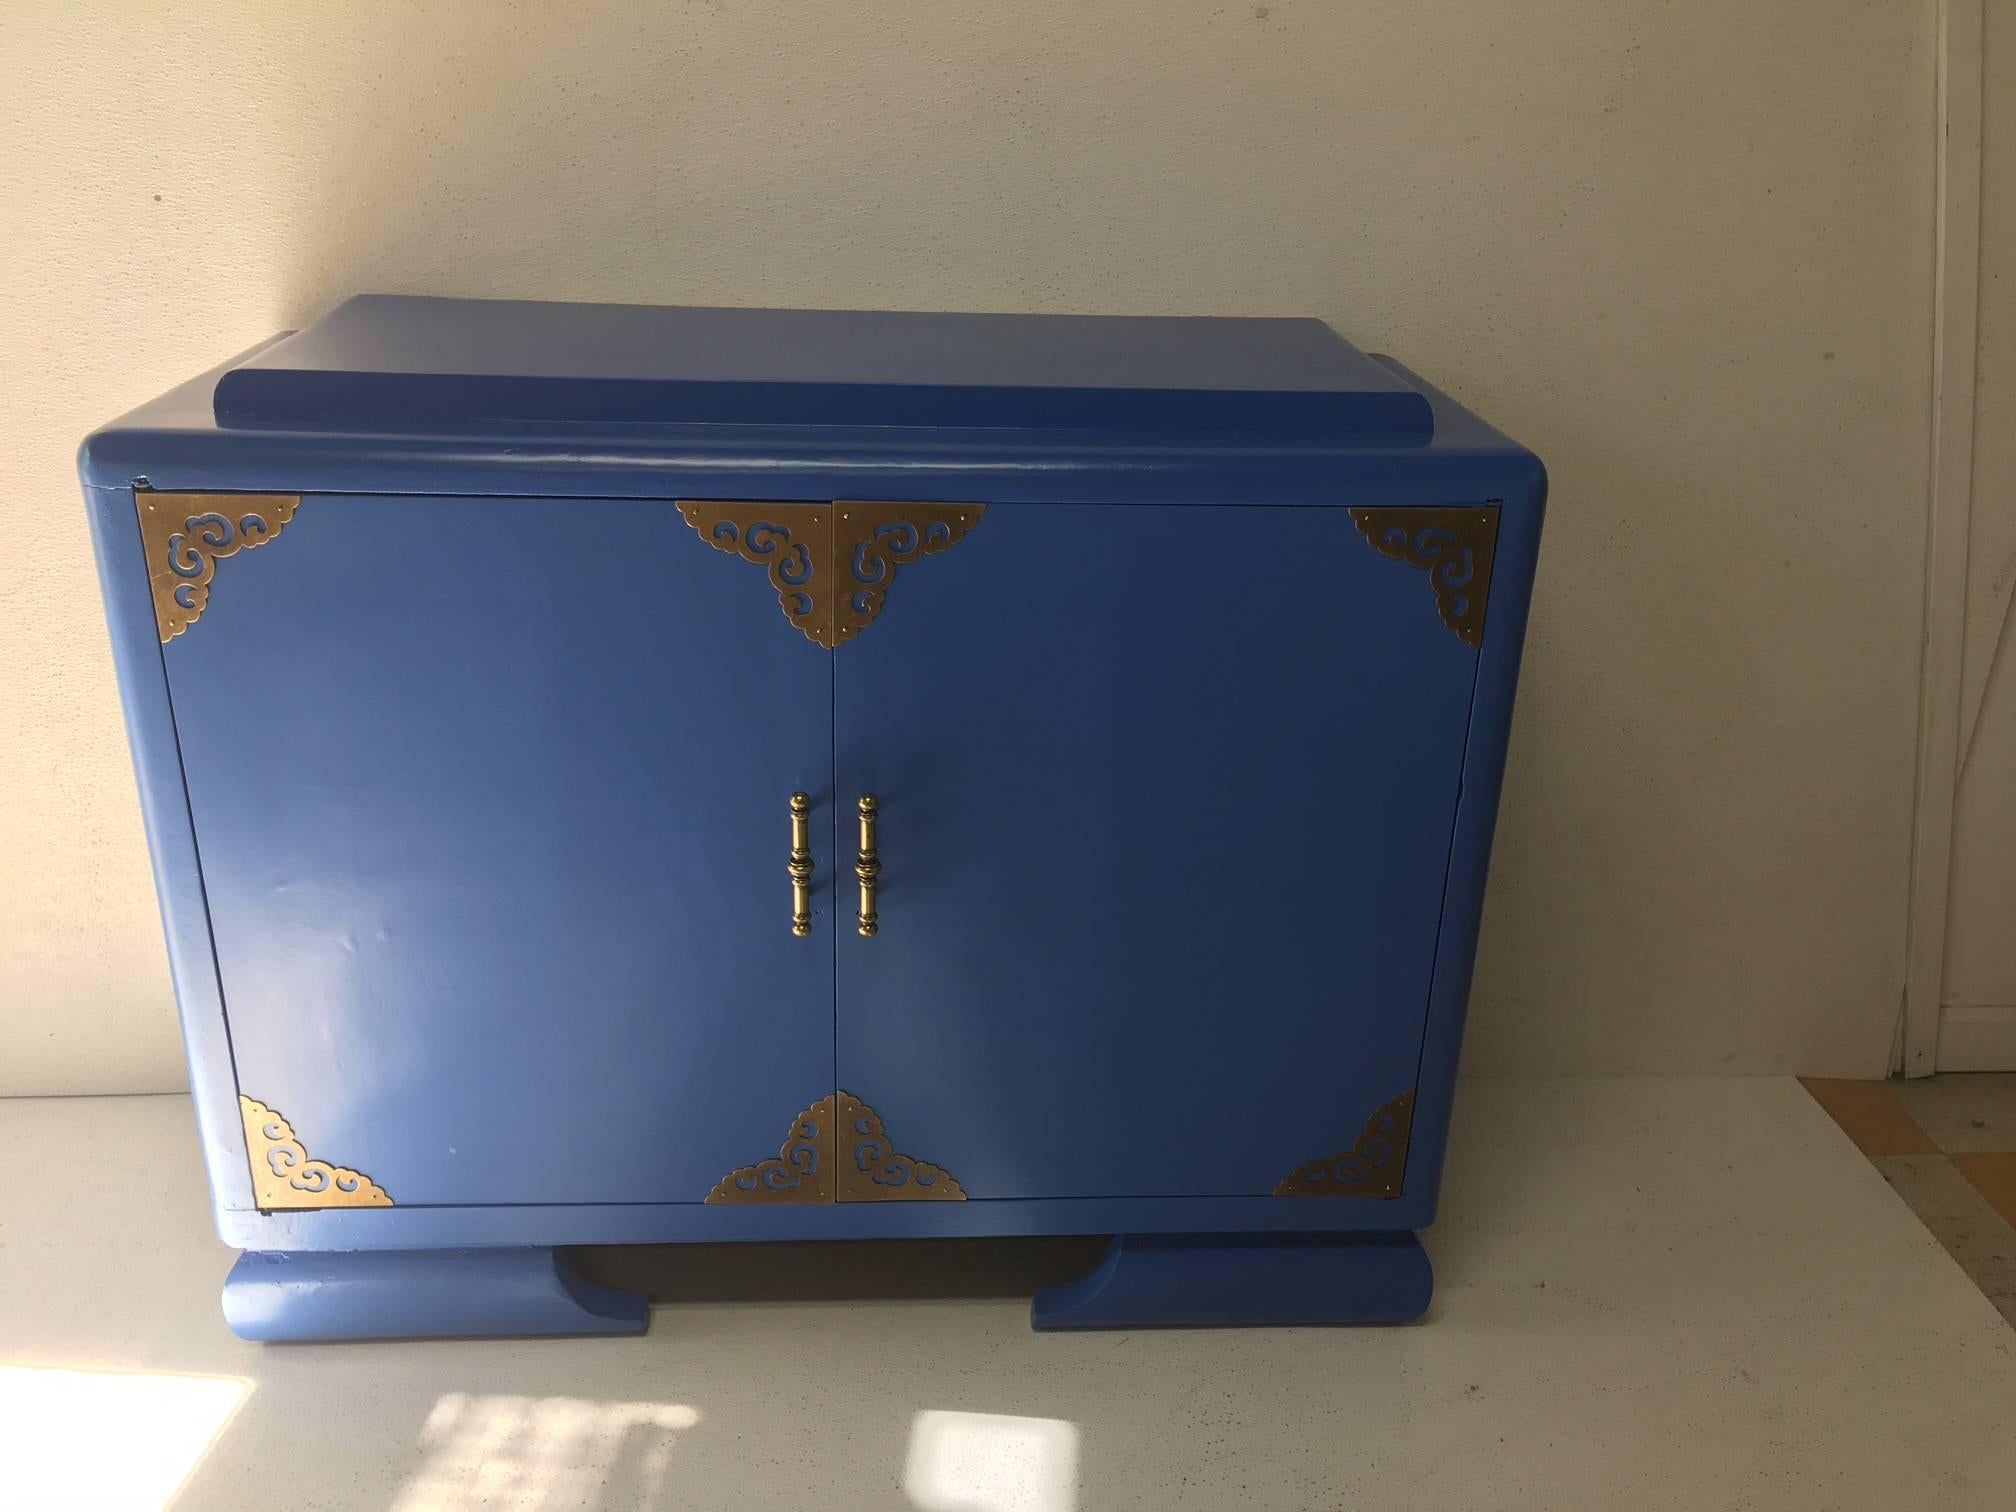 This vintage piece has been given a gloss coat of Athens blue and is now ready to join your collection of blue and white porcelain. Beautiful anywhere in the home, the interior has one shelf, a raised platform, and Ming style feet. Would look lovely